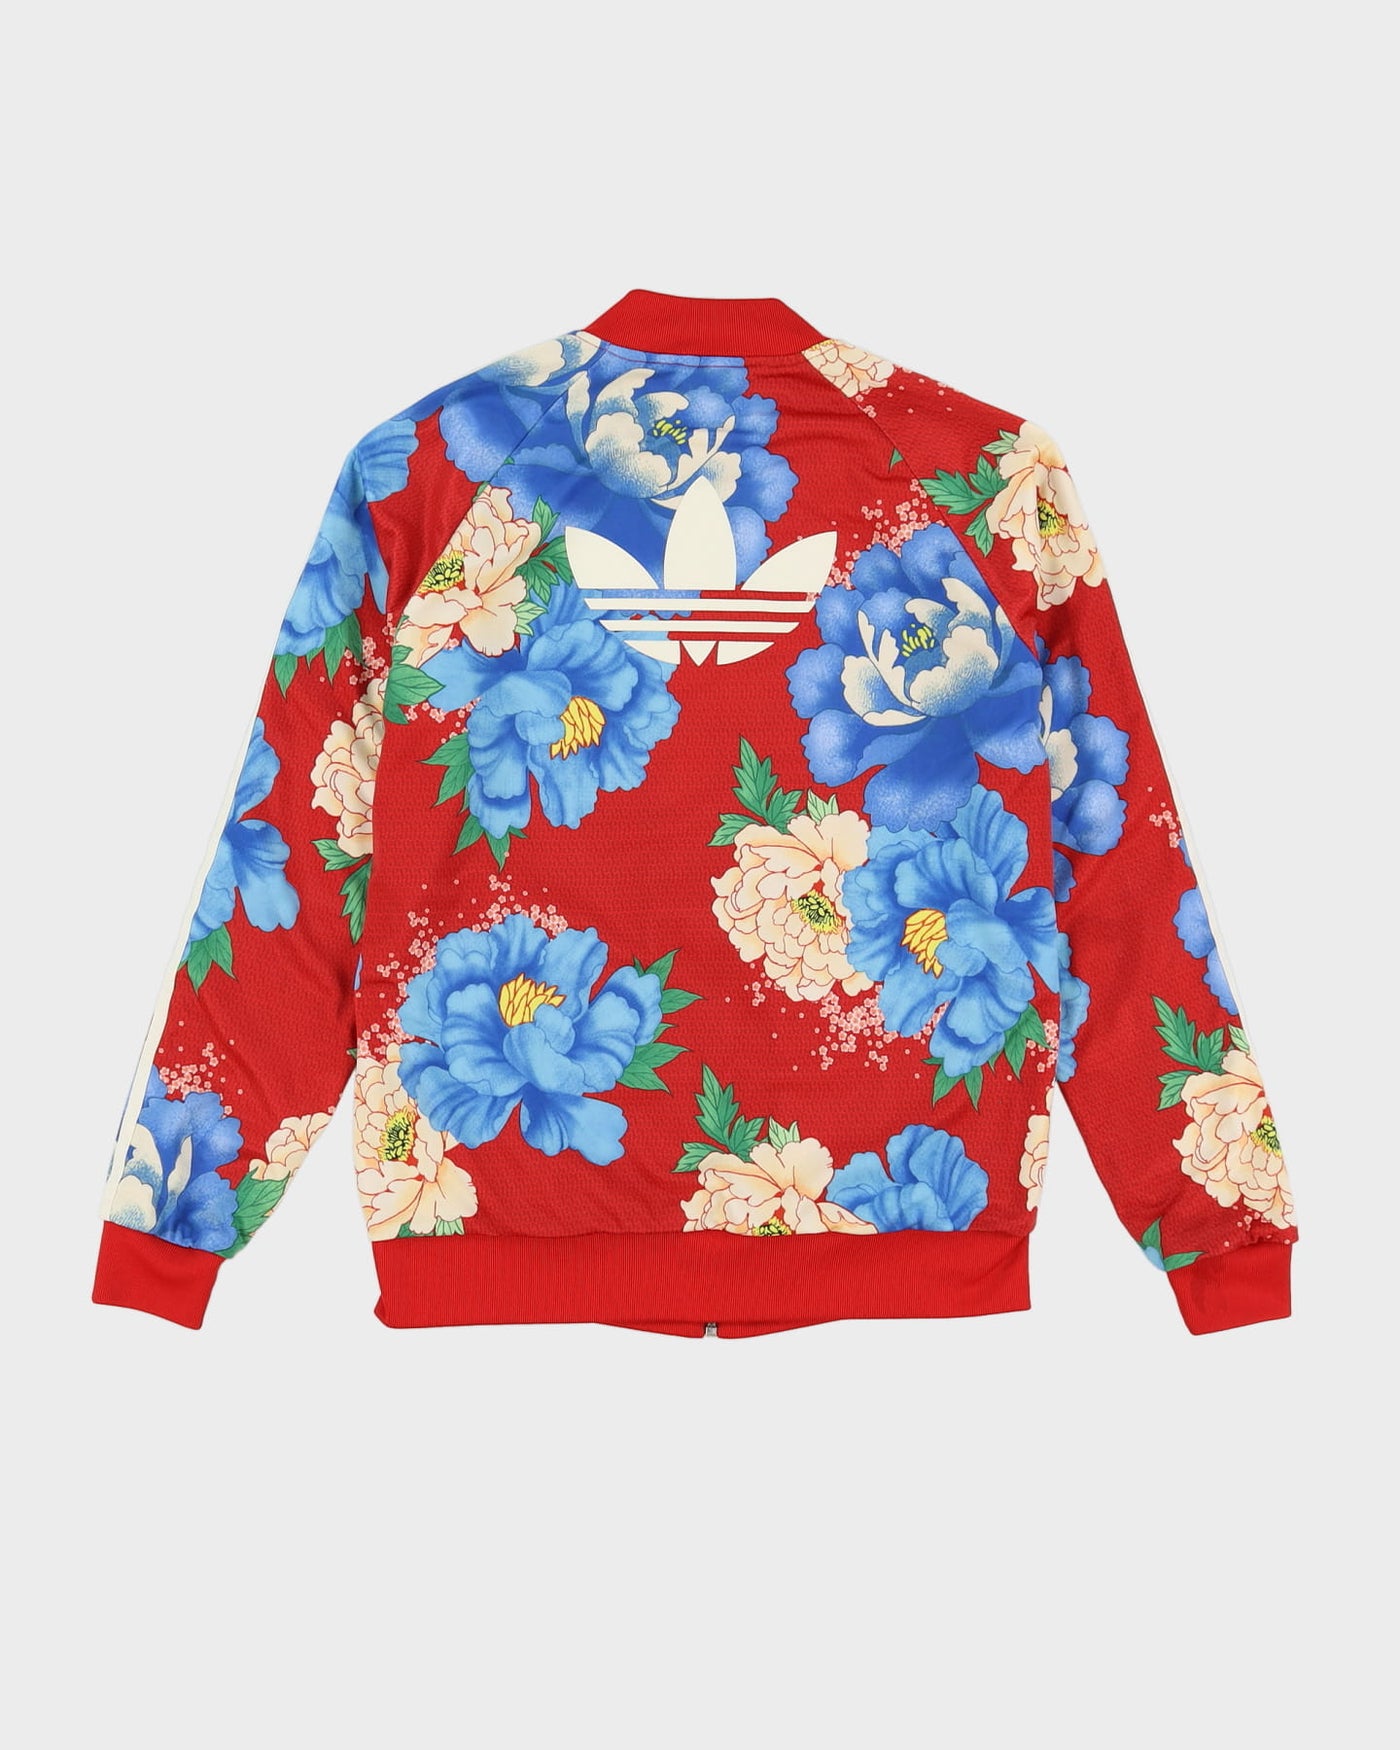 00s Adidas Red / Blue Floral Track Jacket - S